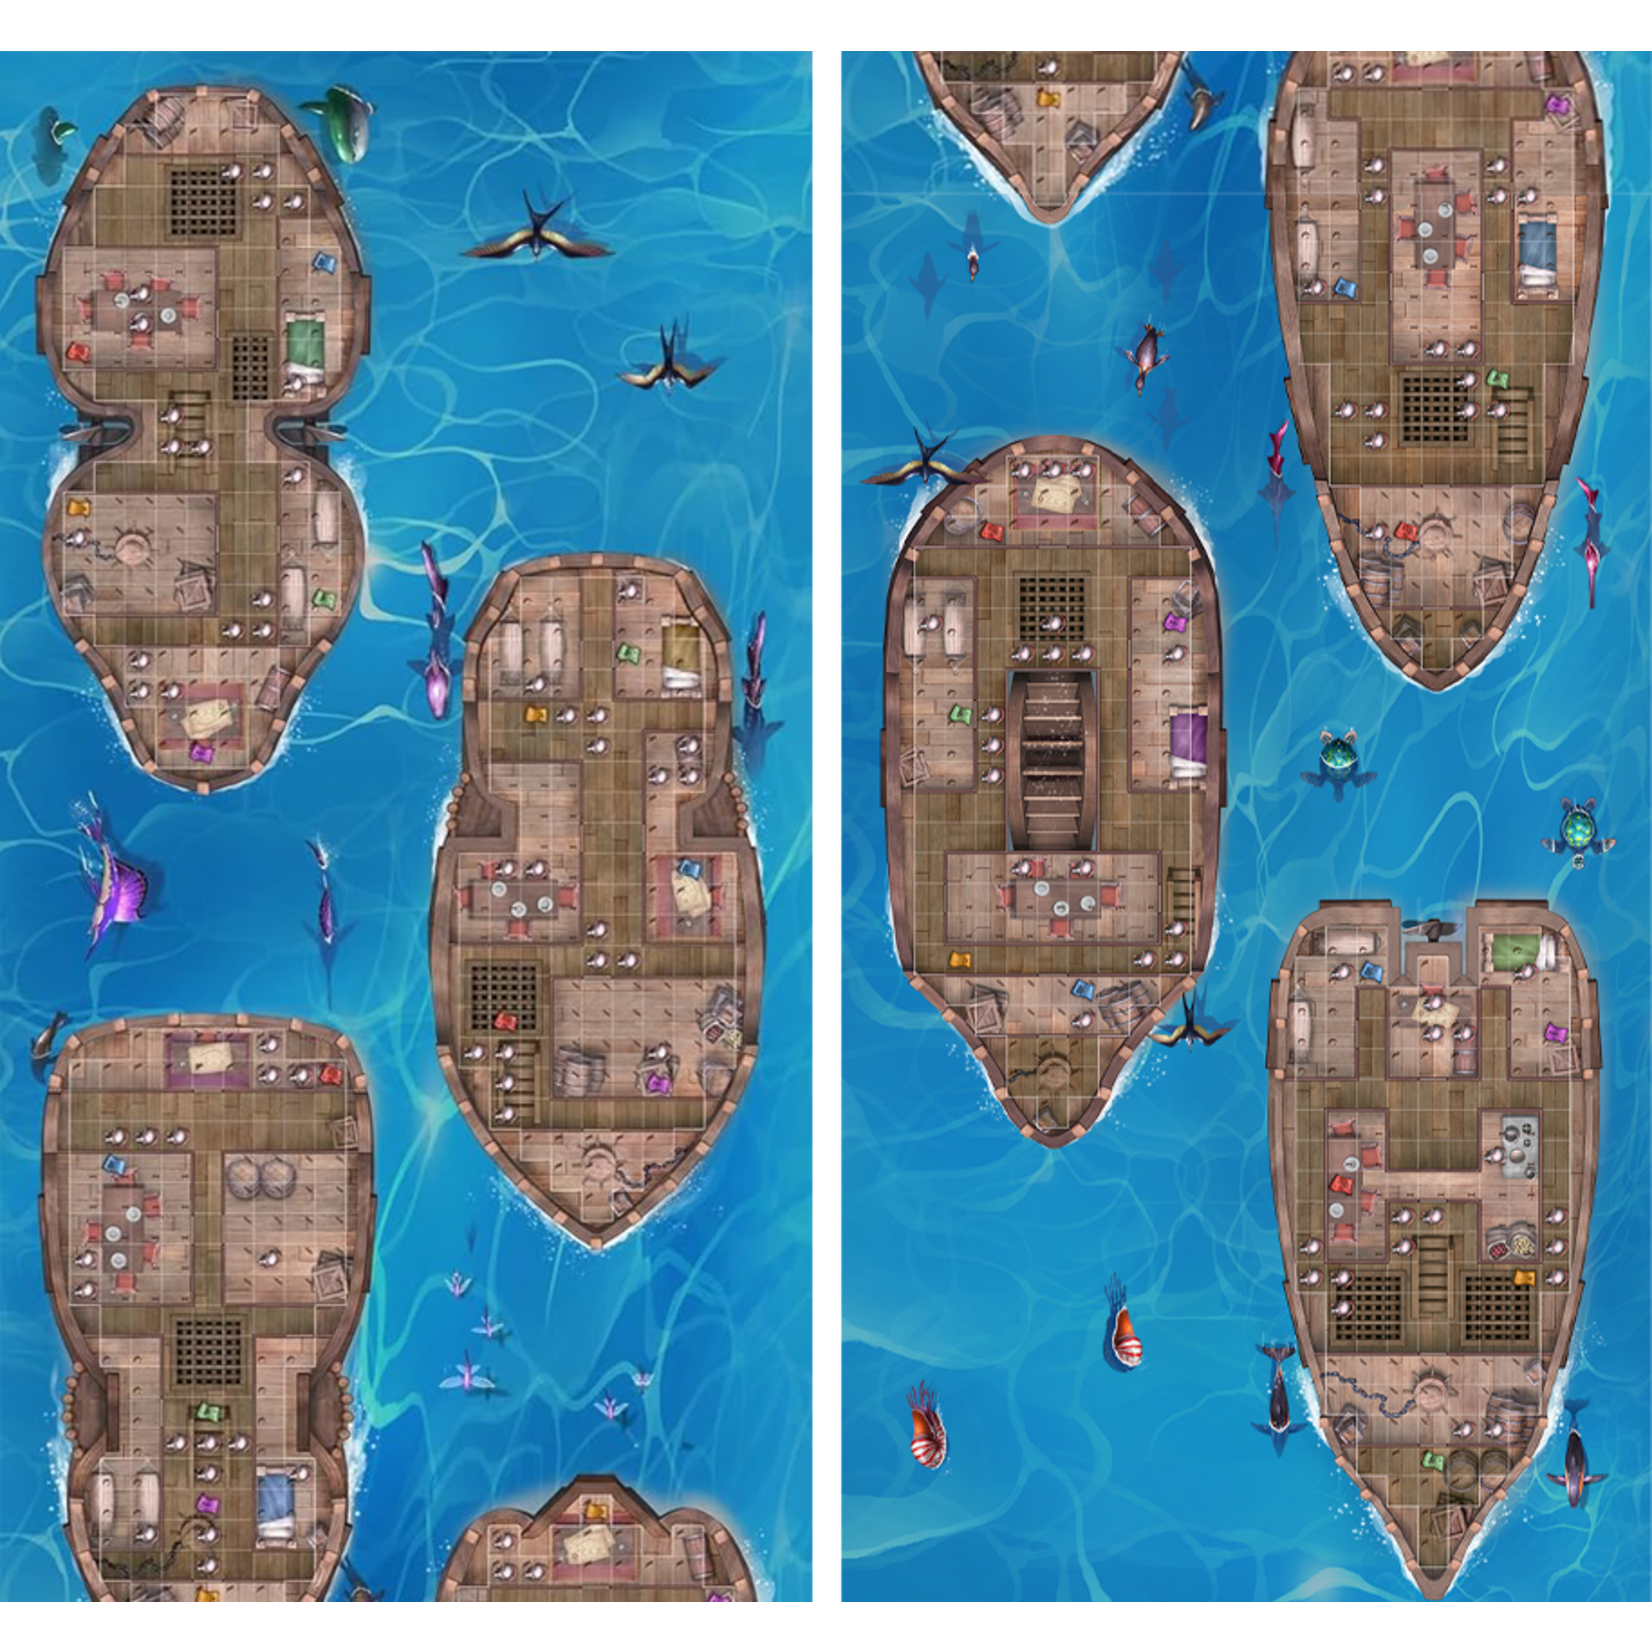 City of Games Isle of Cats: Boat Pack